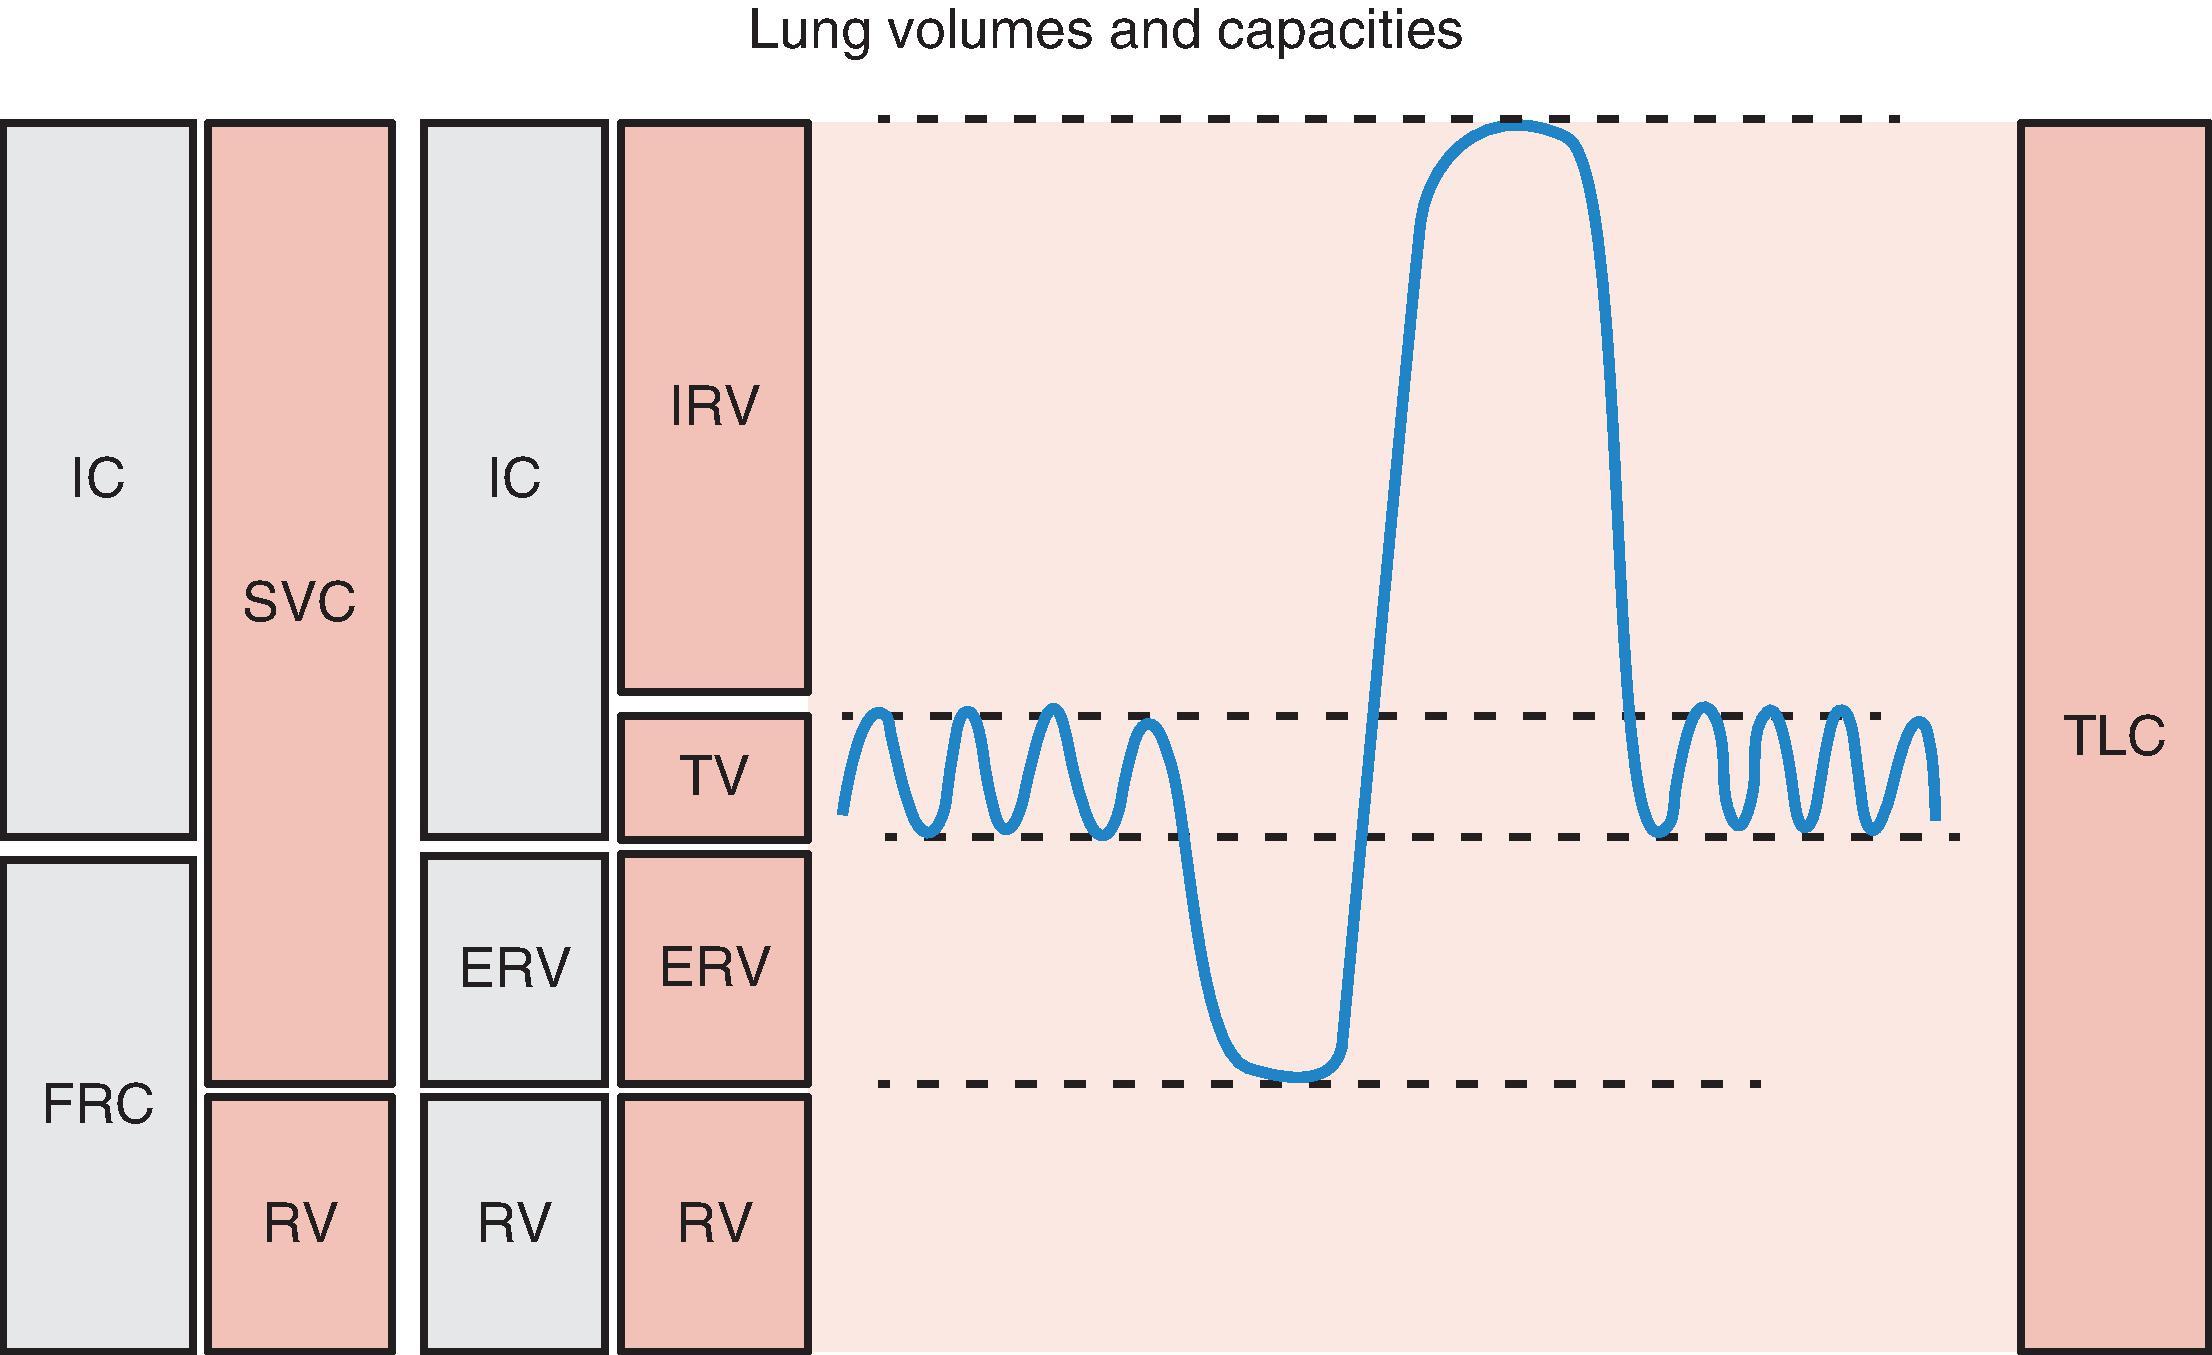 Fig. 27.2, Complete pulmonary function testing will provide data on lung volumes and capacities to differentiate obstructive from restrictive diseases. ERV, Expiratory reserve volume; FRC, functional residual capacity; IC, inspiratory capacity; IRV, inspiratory reserve volume; RV, residual volume; SVC, slow vital capacity; TLC, total lung capacity; TV, tidal volume. (Reprinted from Patterson AG, Cooper JD, Deslauriers J, et al., eds. Pearson’s Thoracic and Esophageal Surgery. 3rd ed. Philadelphia: Elsevier; 2008. p. 1168, with permission.)